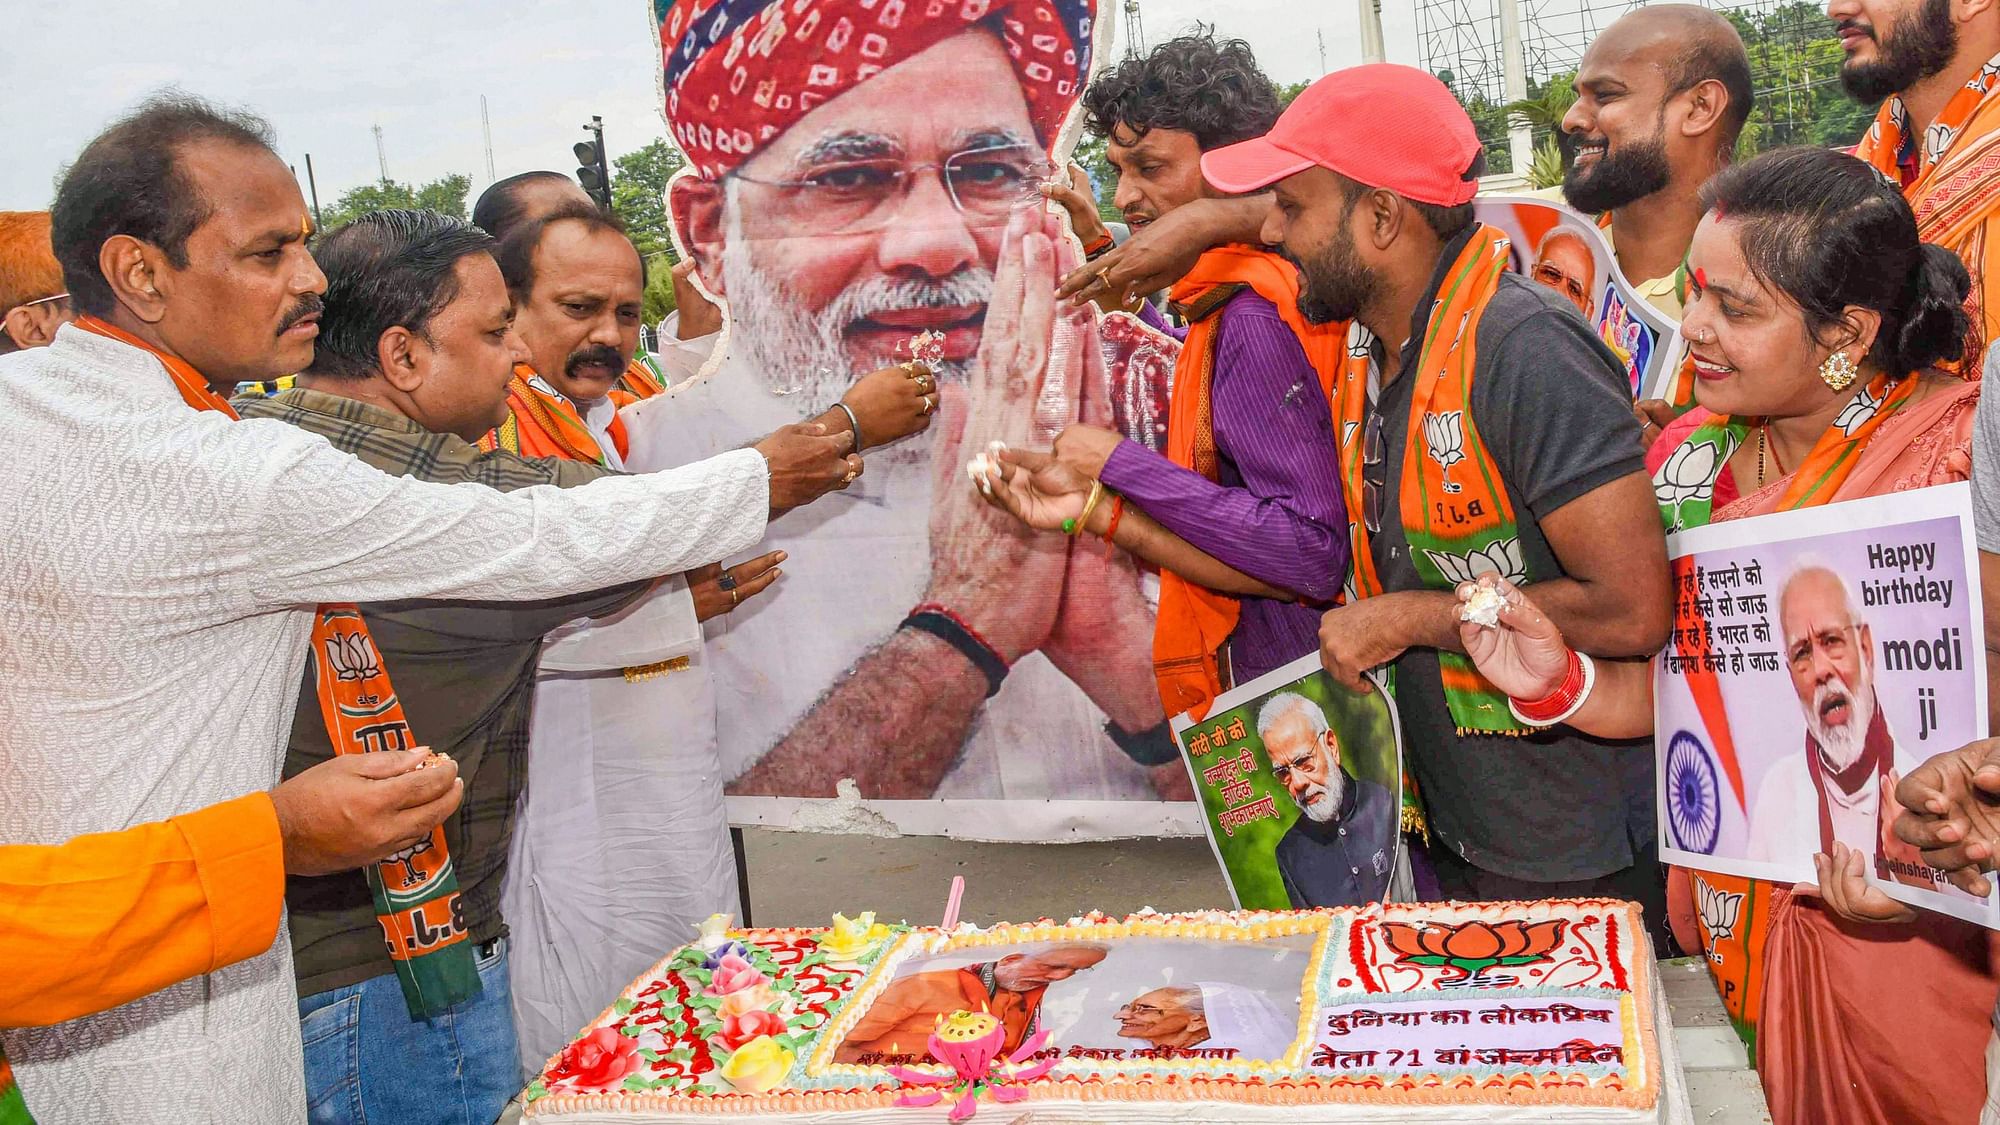 <div class="paragraphs"><p>BJP workers celebrate on the eve of Prime Minister Narendra Modi's birthday in Patna on Thursday.</p></div>